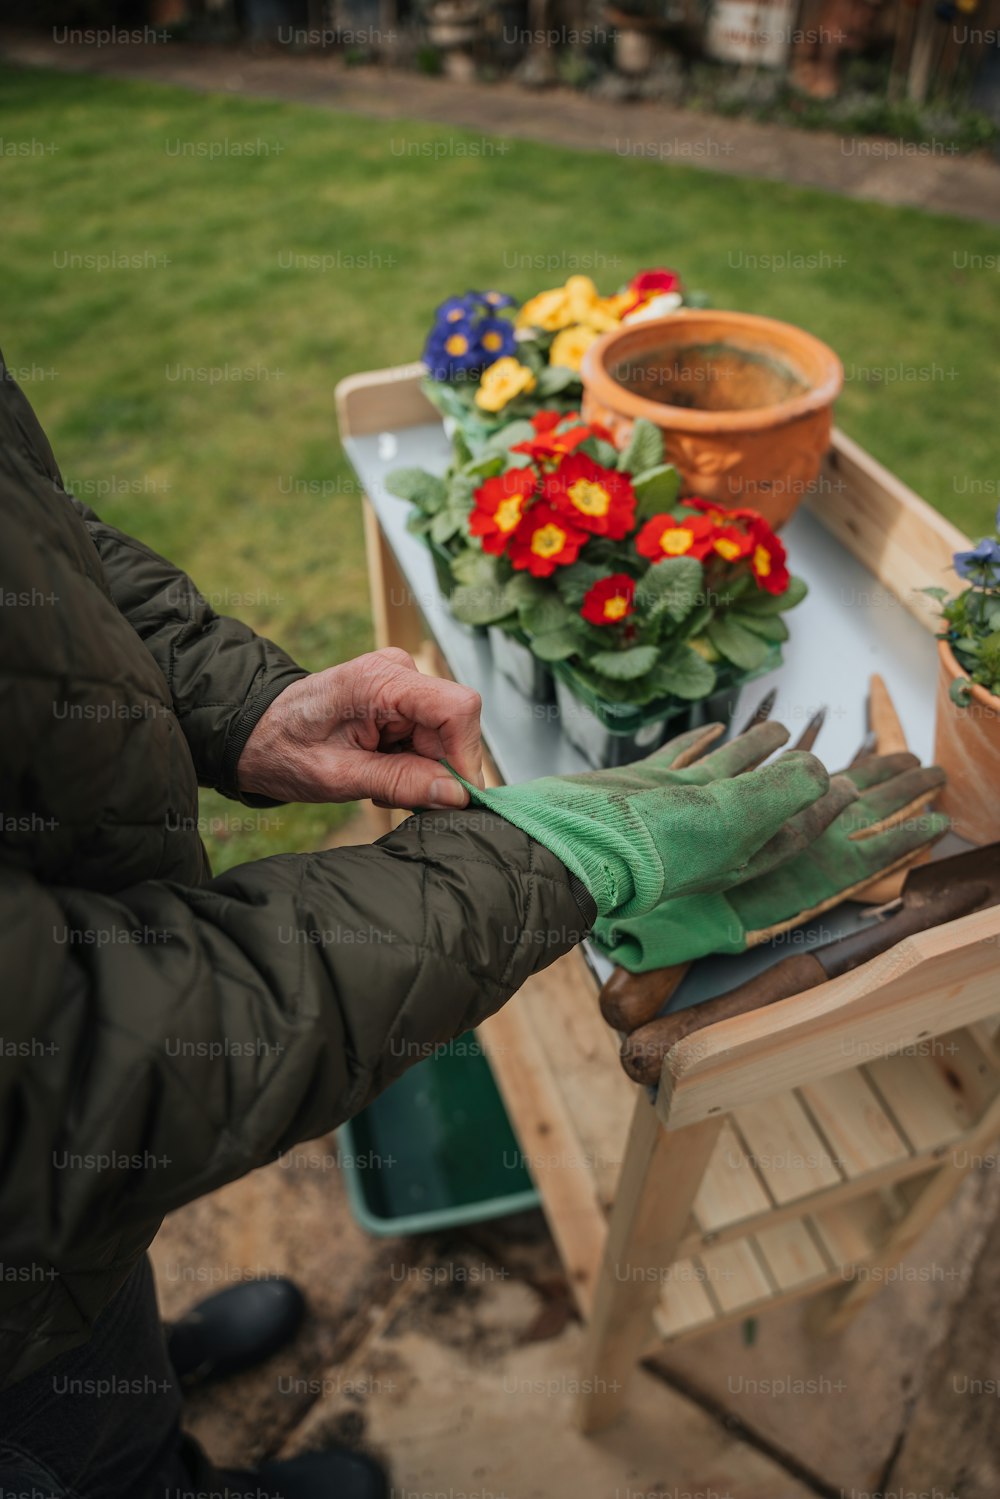 a person wearing gardening gloves and gardening gloves